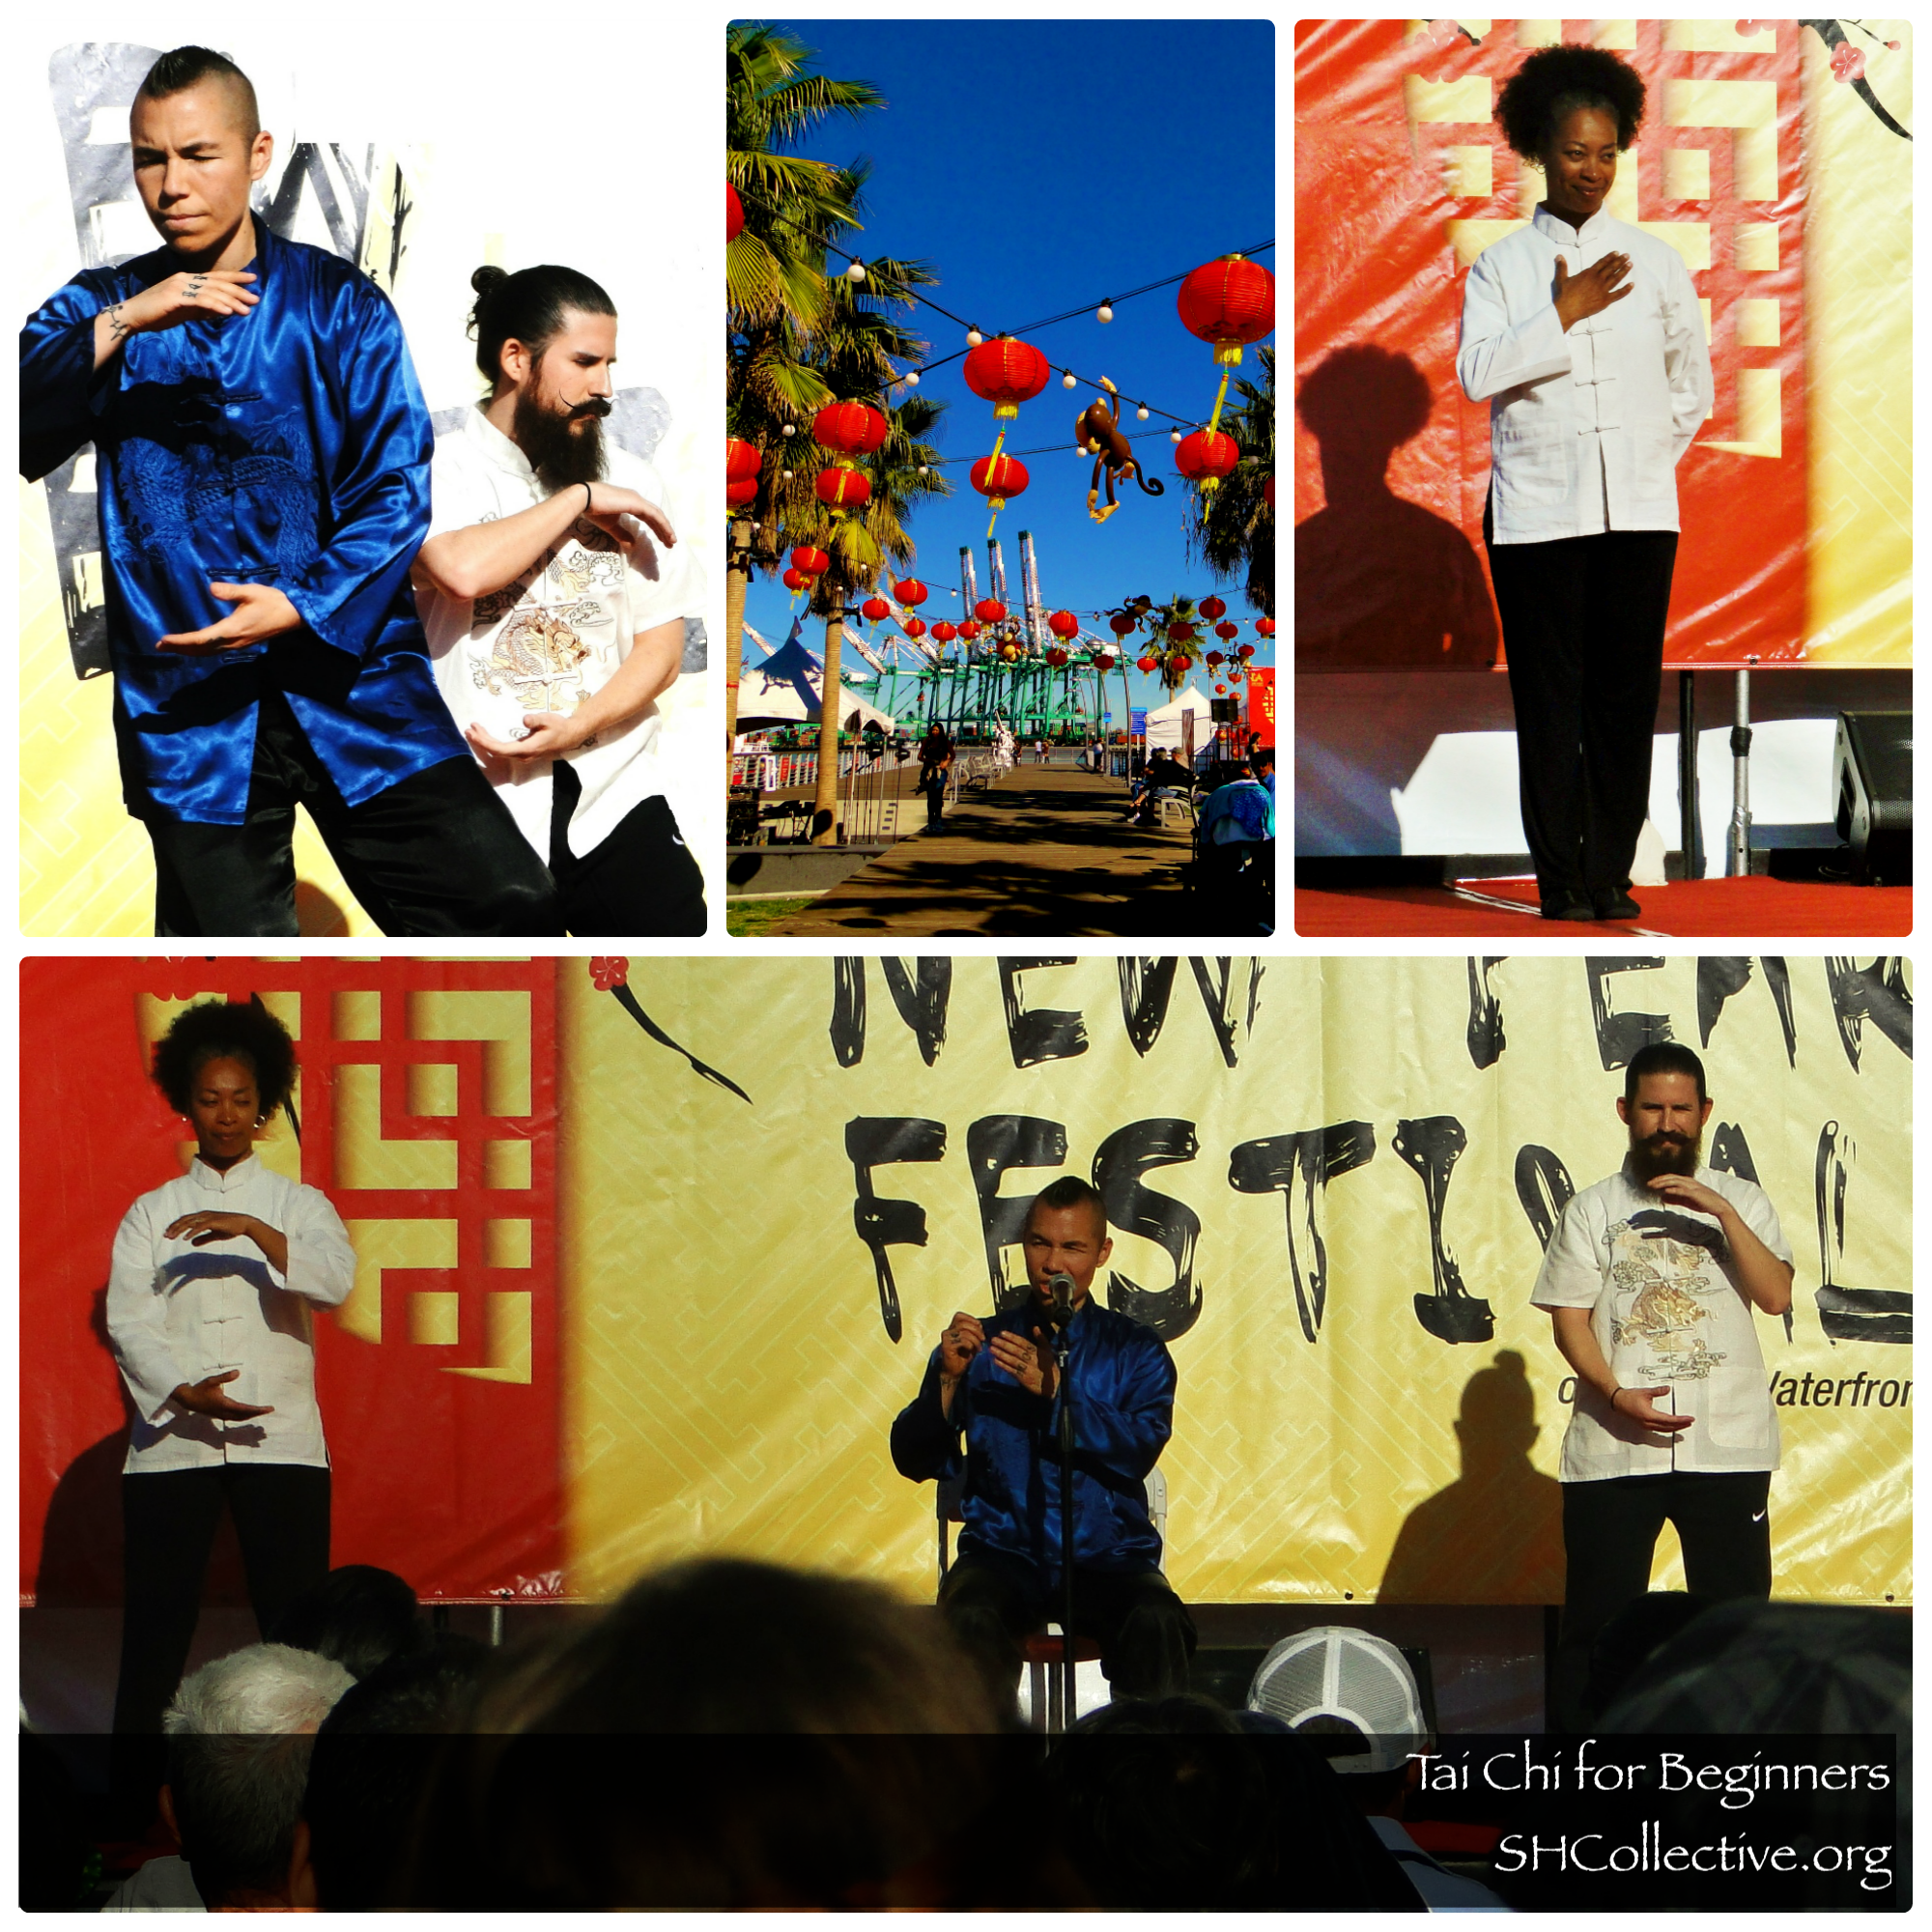 Tai Chi instructor Angie Sierra on stage with two of her assistance demonstrating Tai Chi at a Lunar Festival 